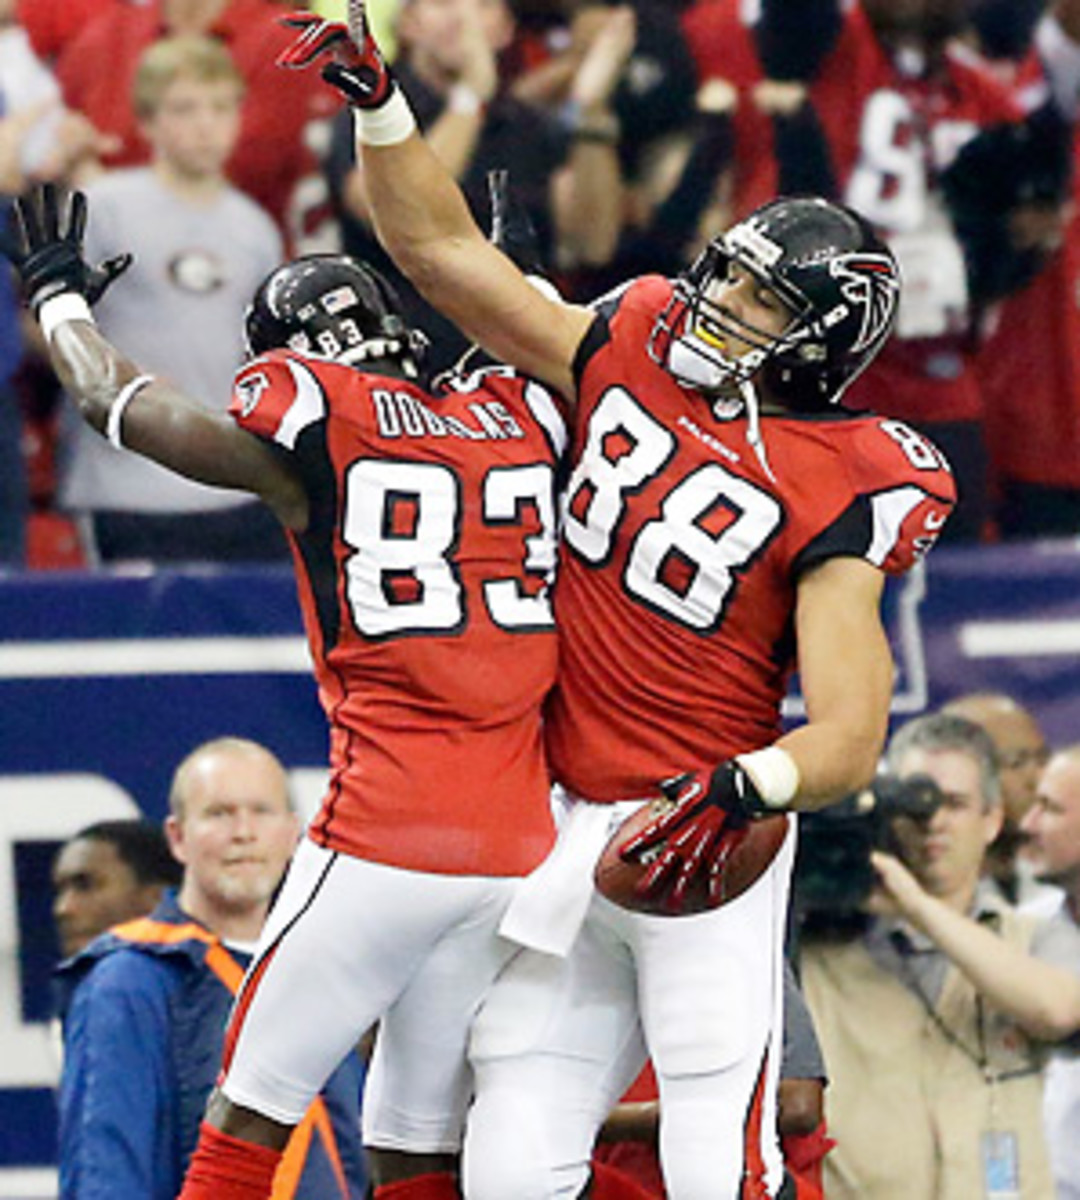 Tony Gonzalez's clutch catch helped secure the first playoff win in his 16-year career. (David Goldman/AP)